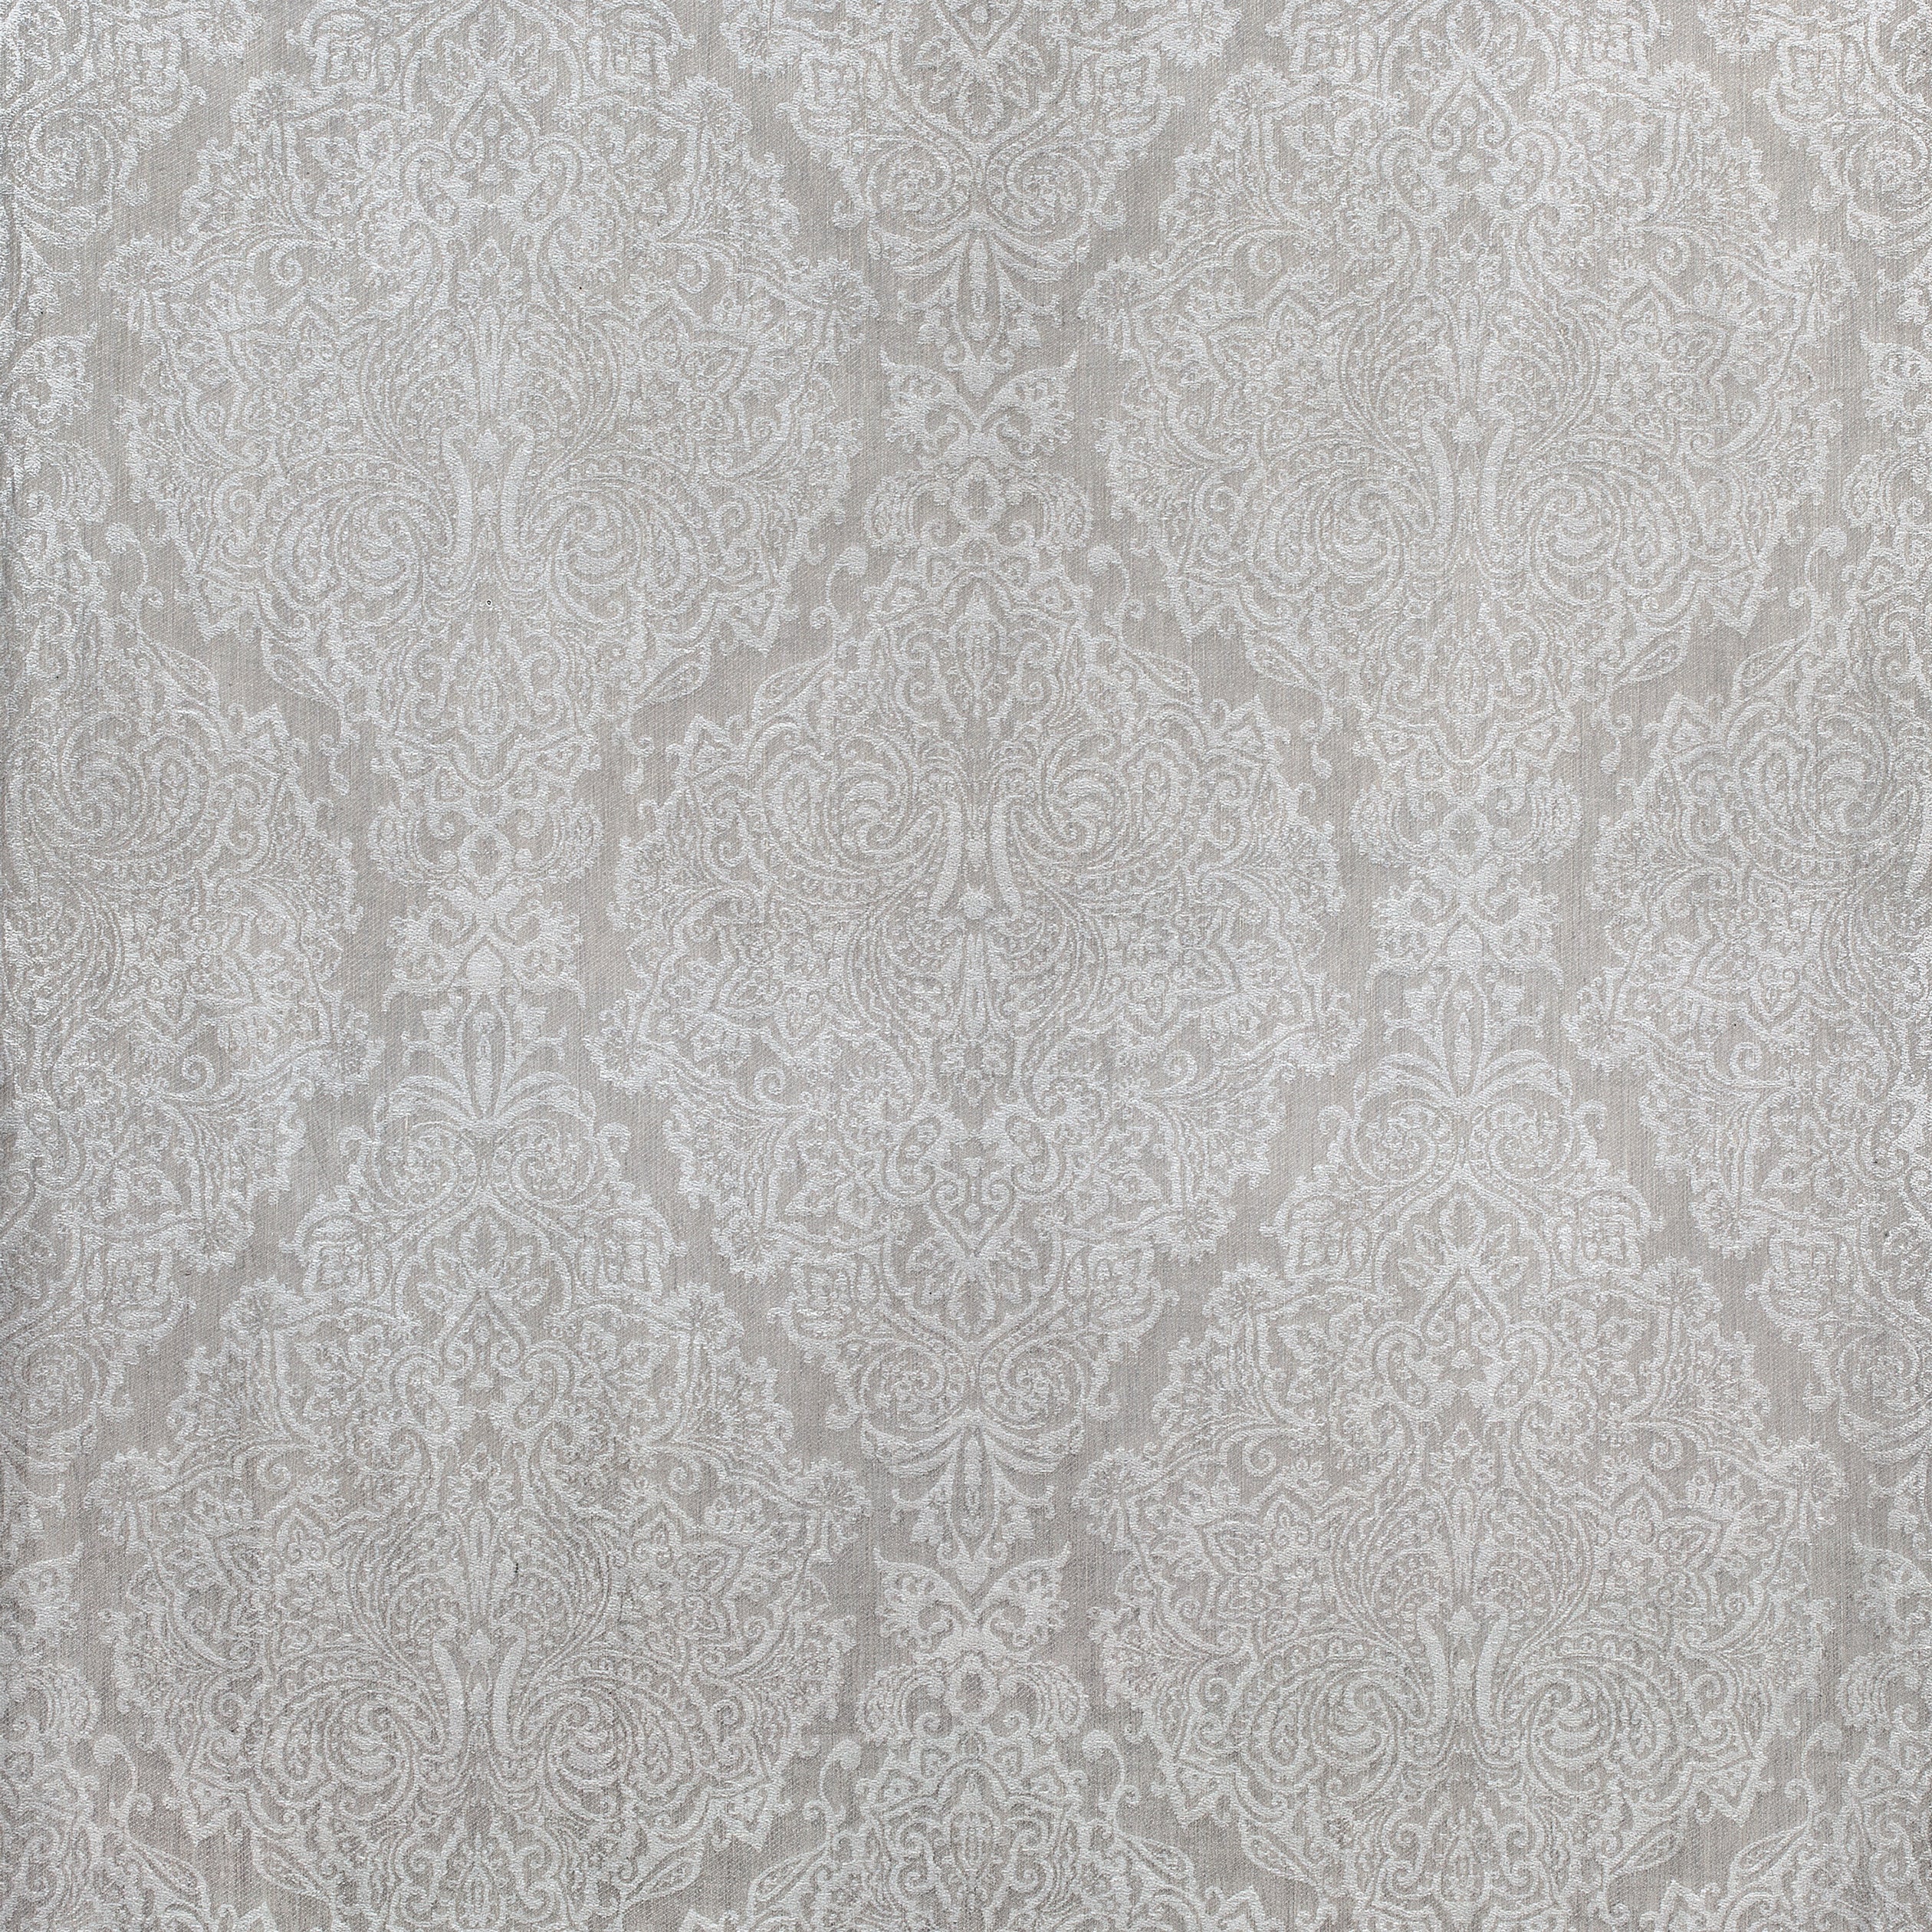 Sterling Paisley fabric in flax color - pattern number AW73026 - by Anna French in the Meridian collection